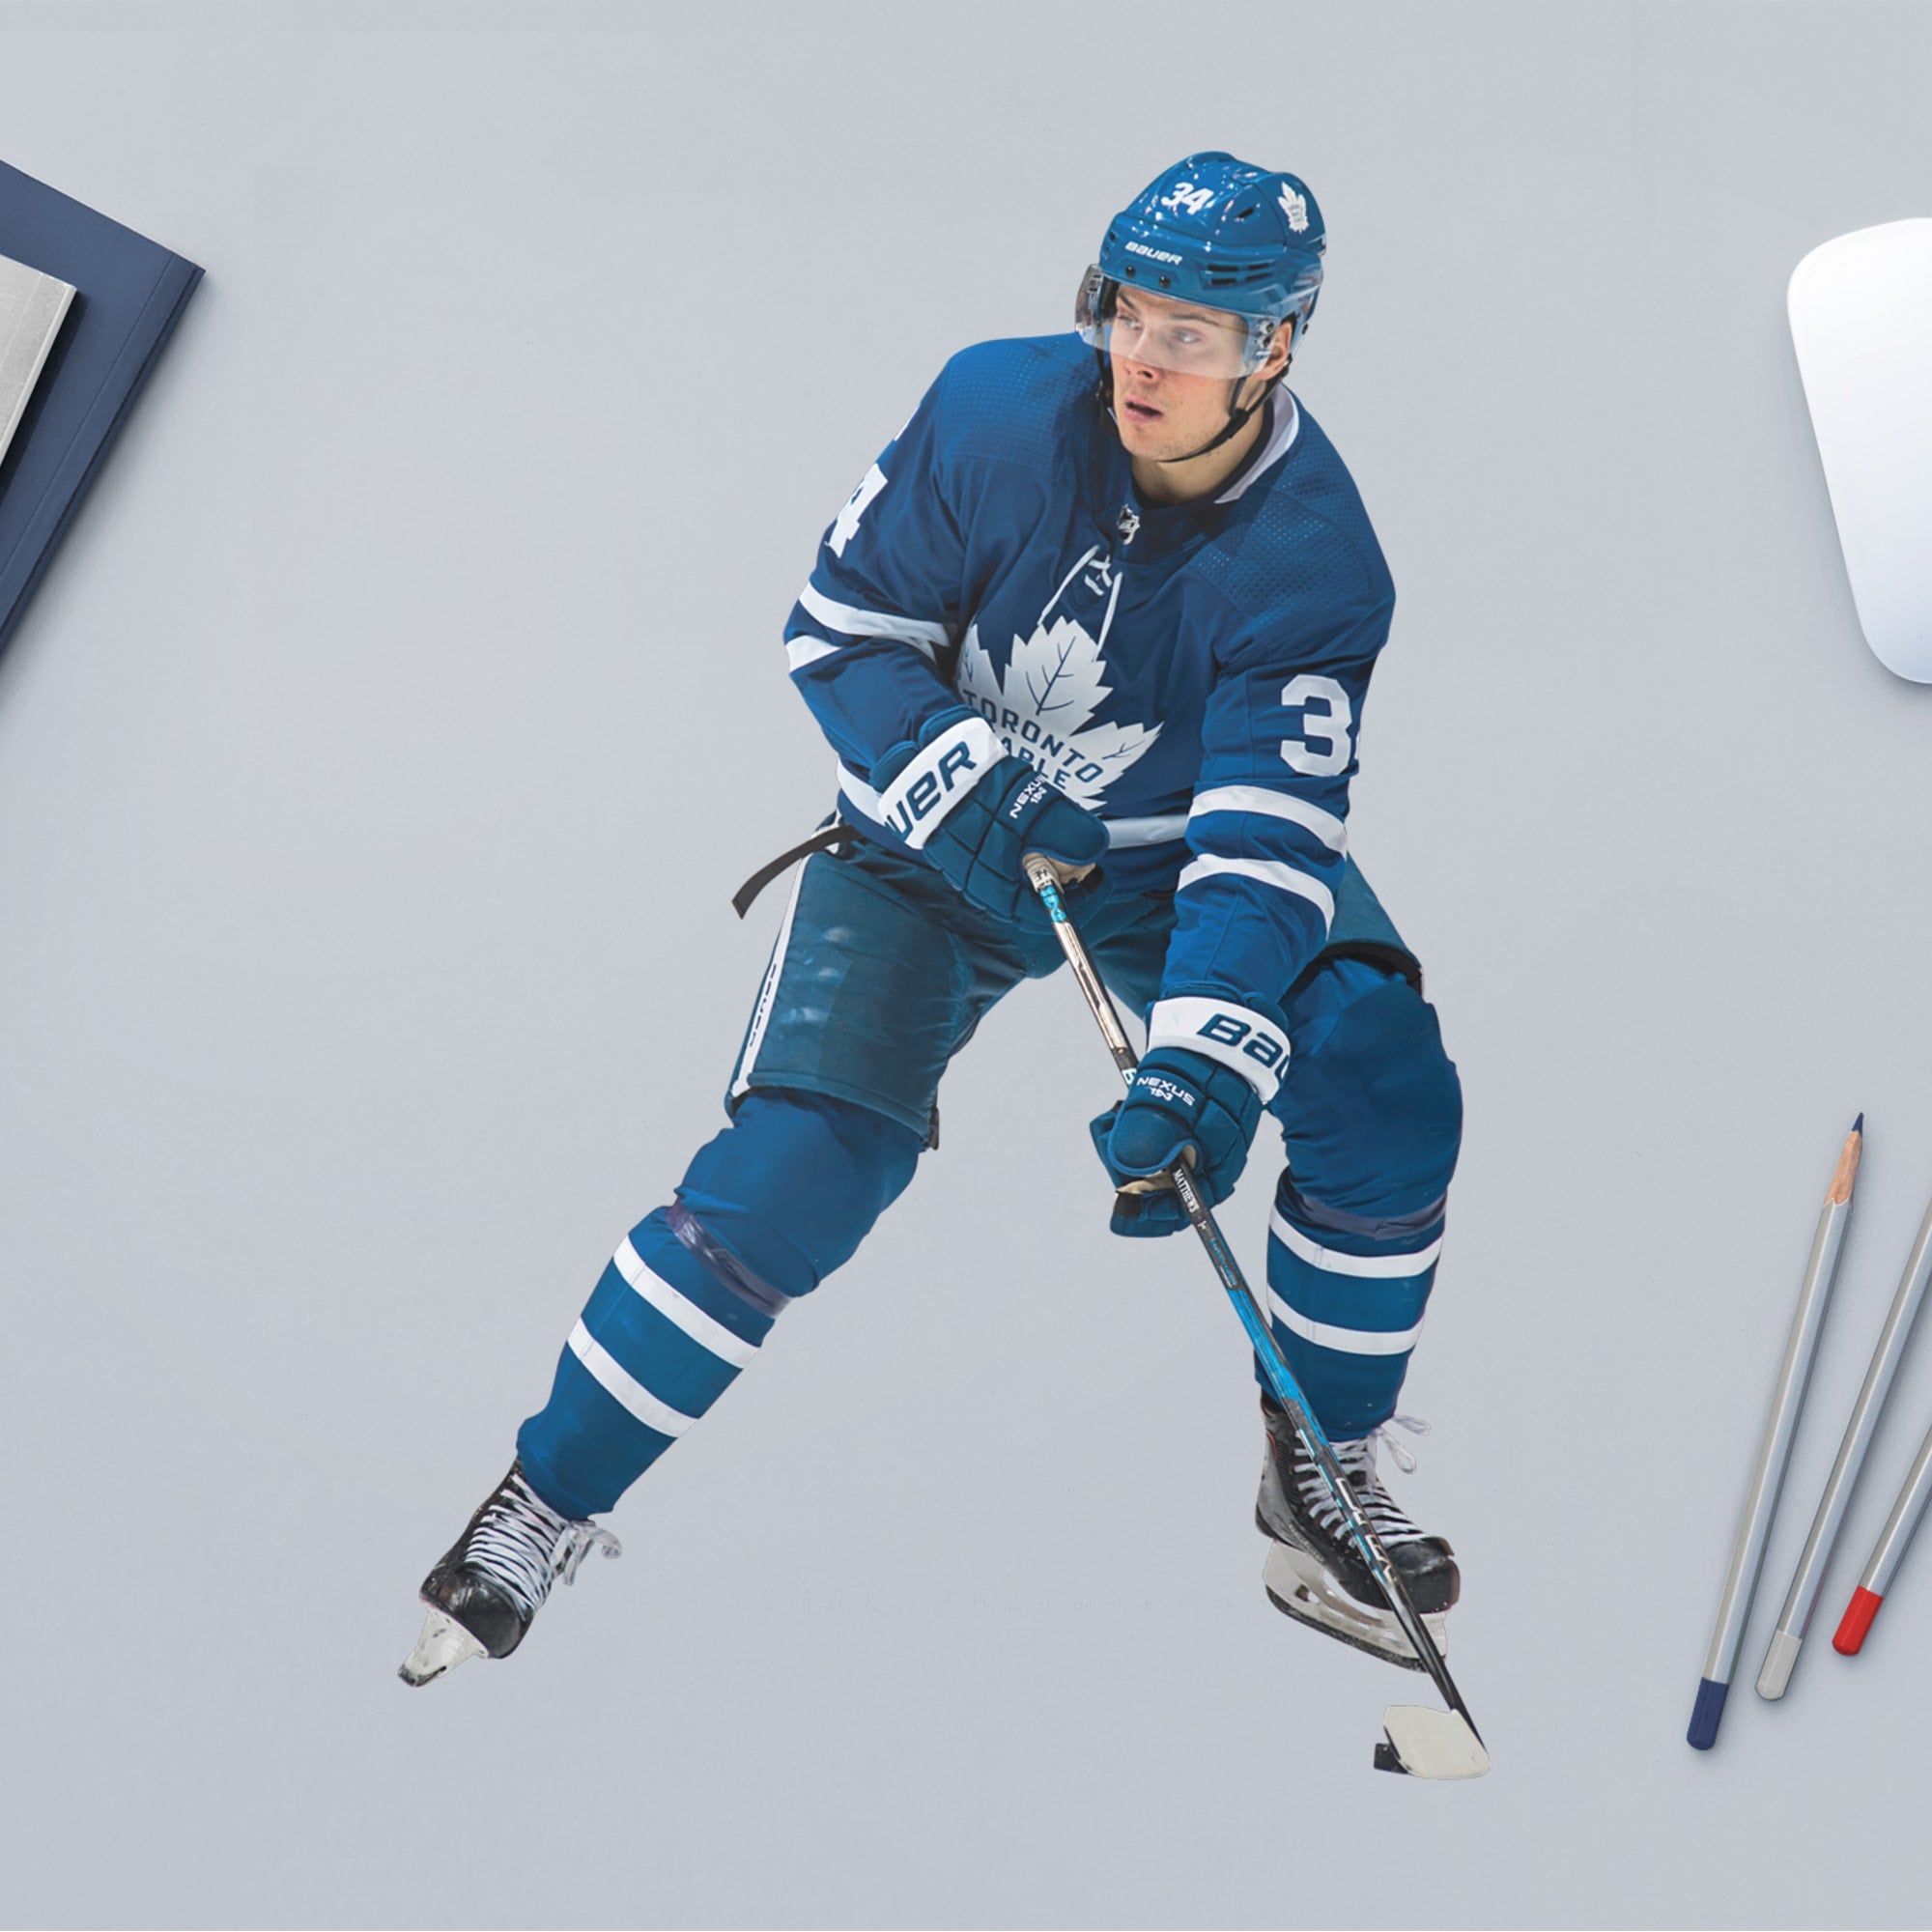 Auston Matthews for Toronto Maple Leafs - Officially Licensed NHL Removable Wall Decal 11.0"W x 16.5"H by Fathead | Vinyl